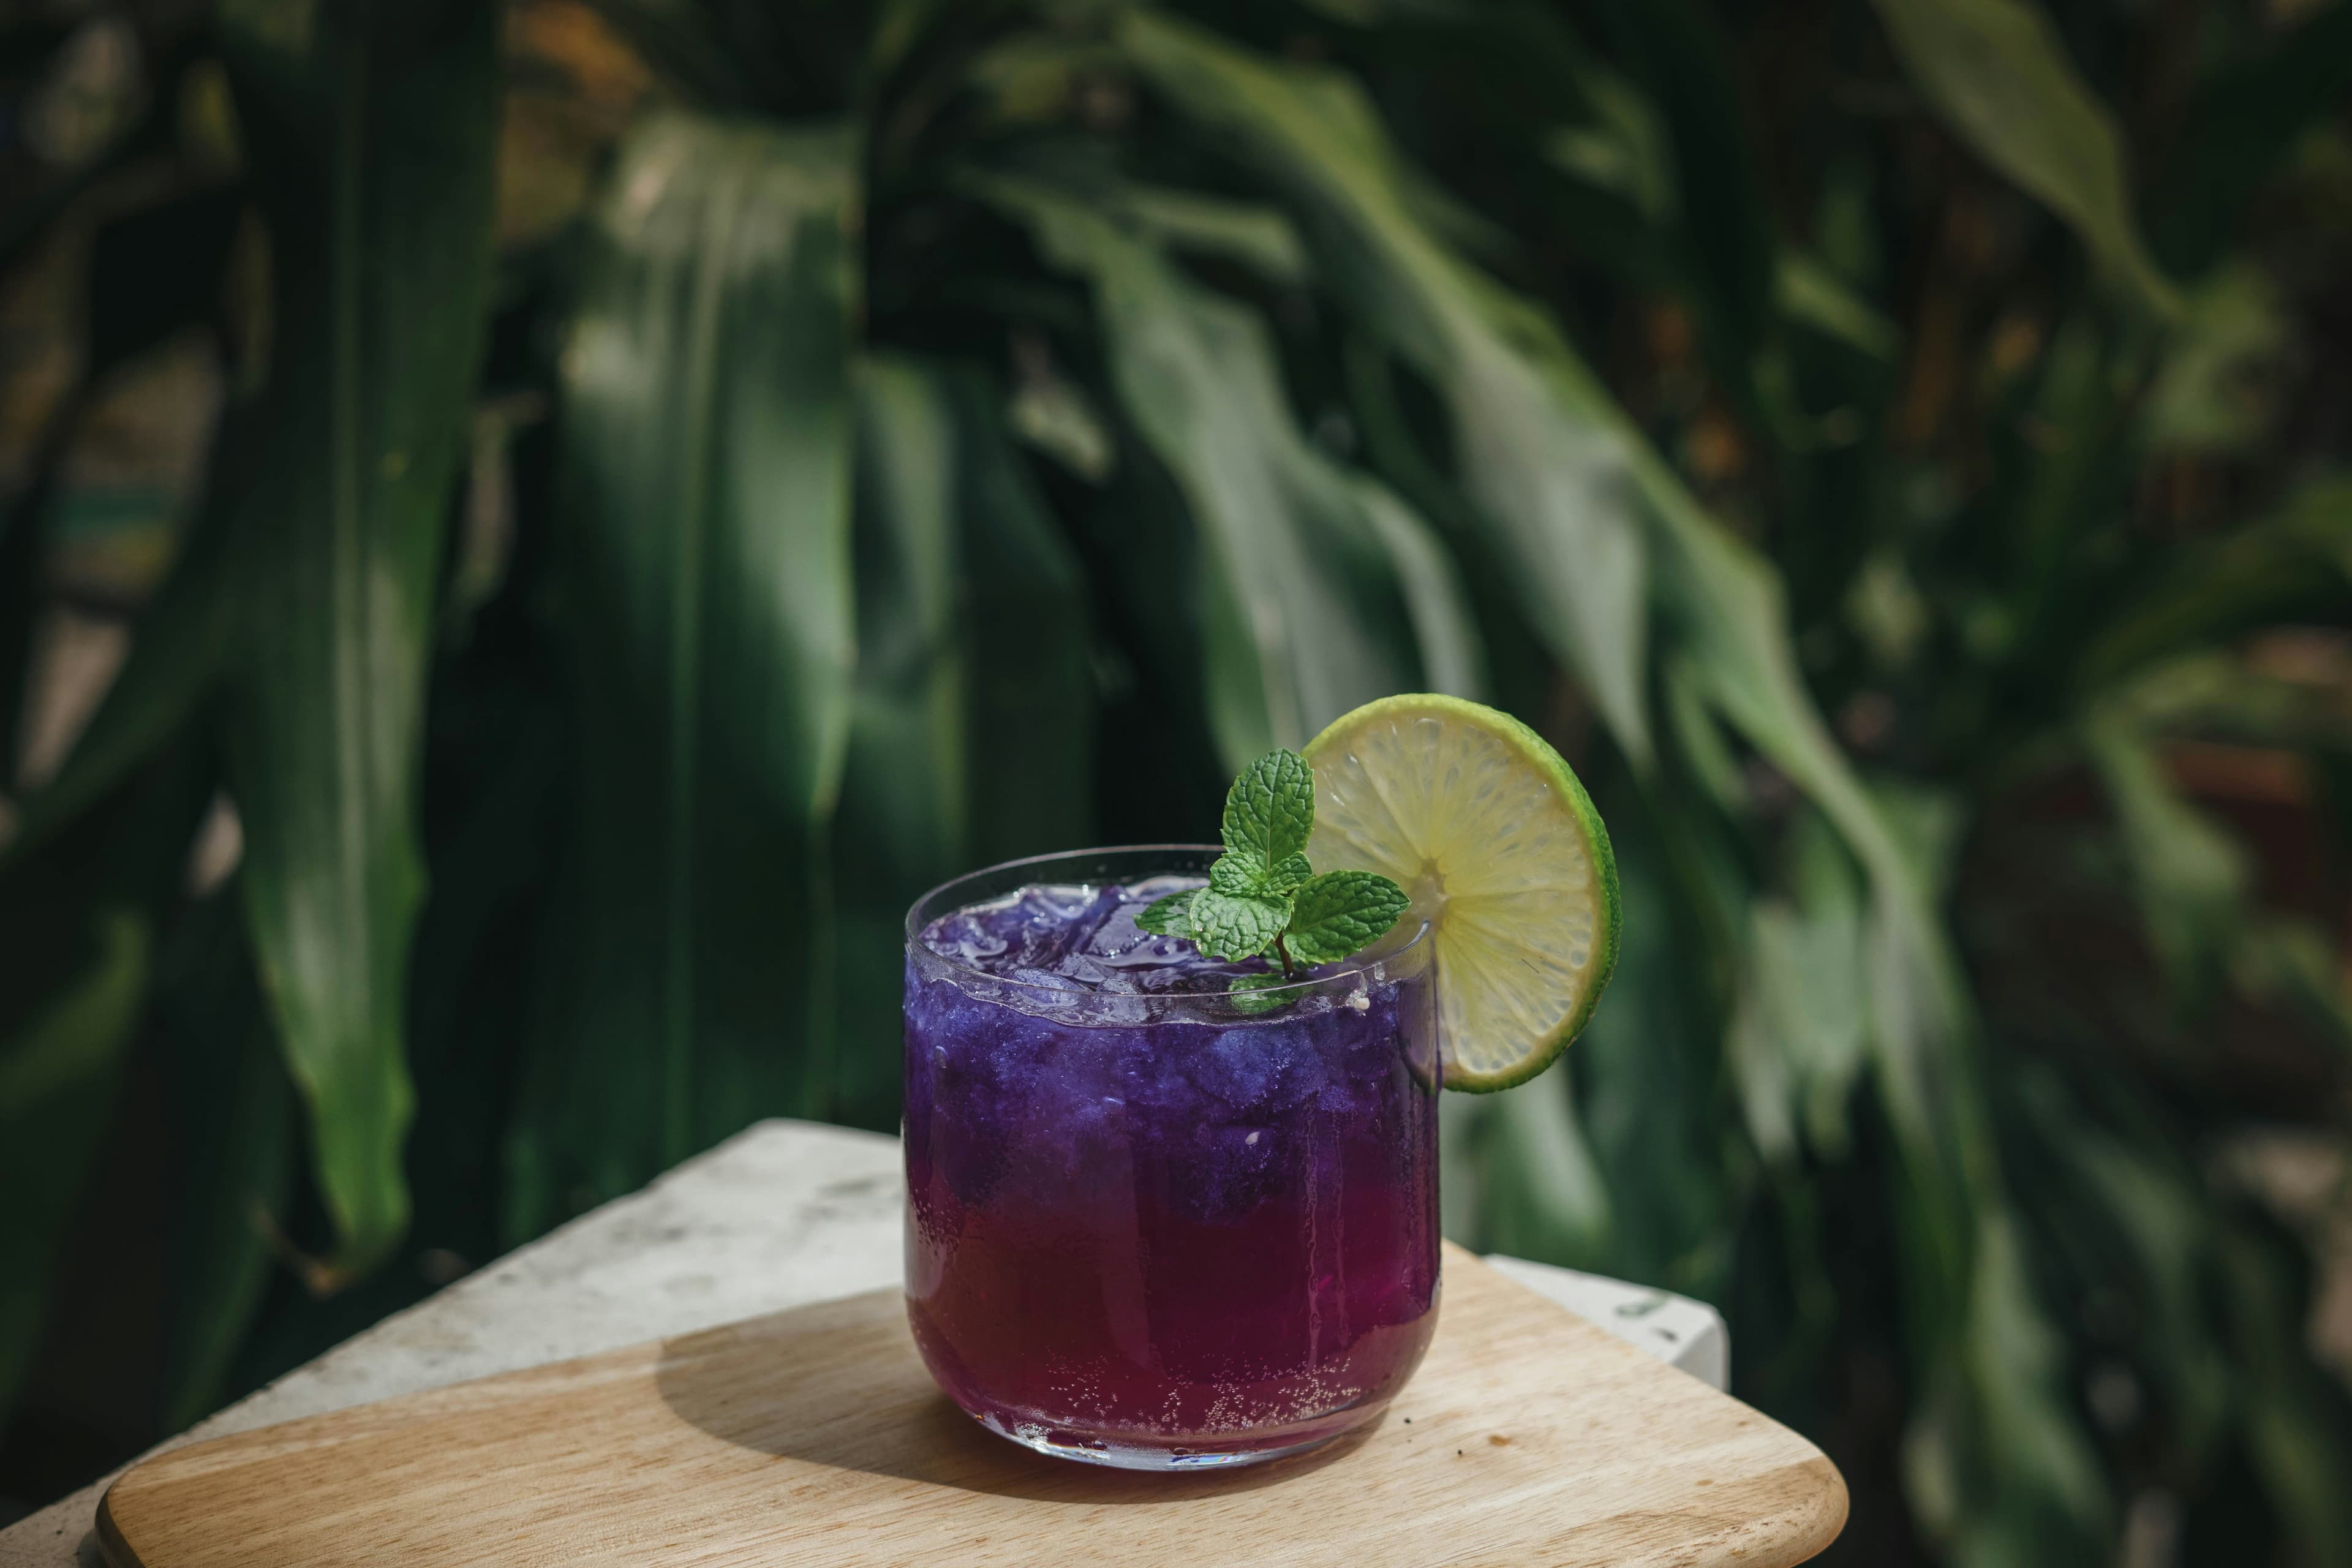 Undoubtedly, purple honey has sparked the interest and curiosity of many mixologists who dabble with different ingredients to prepare some curiously delicious mixes. 